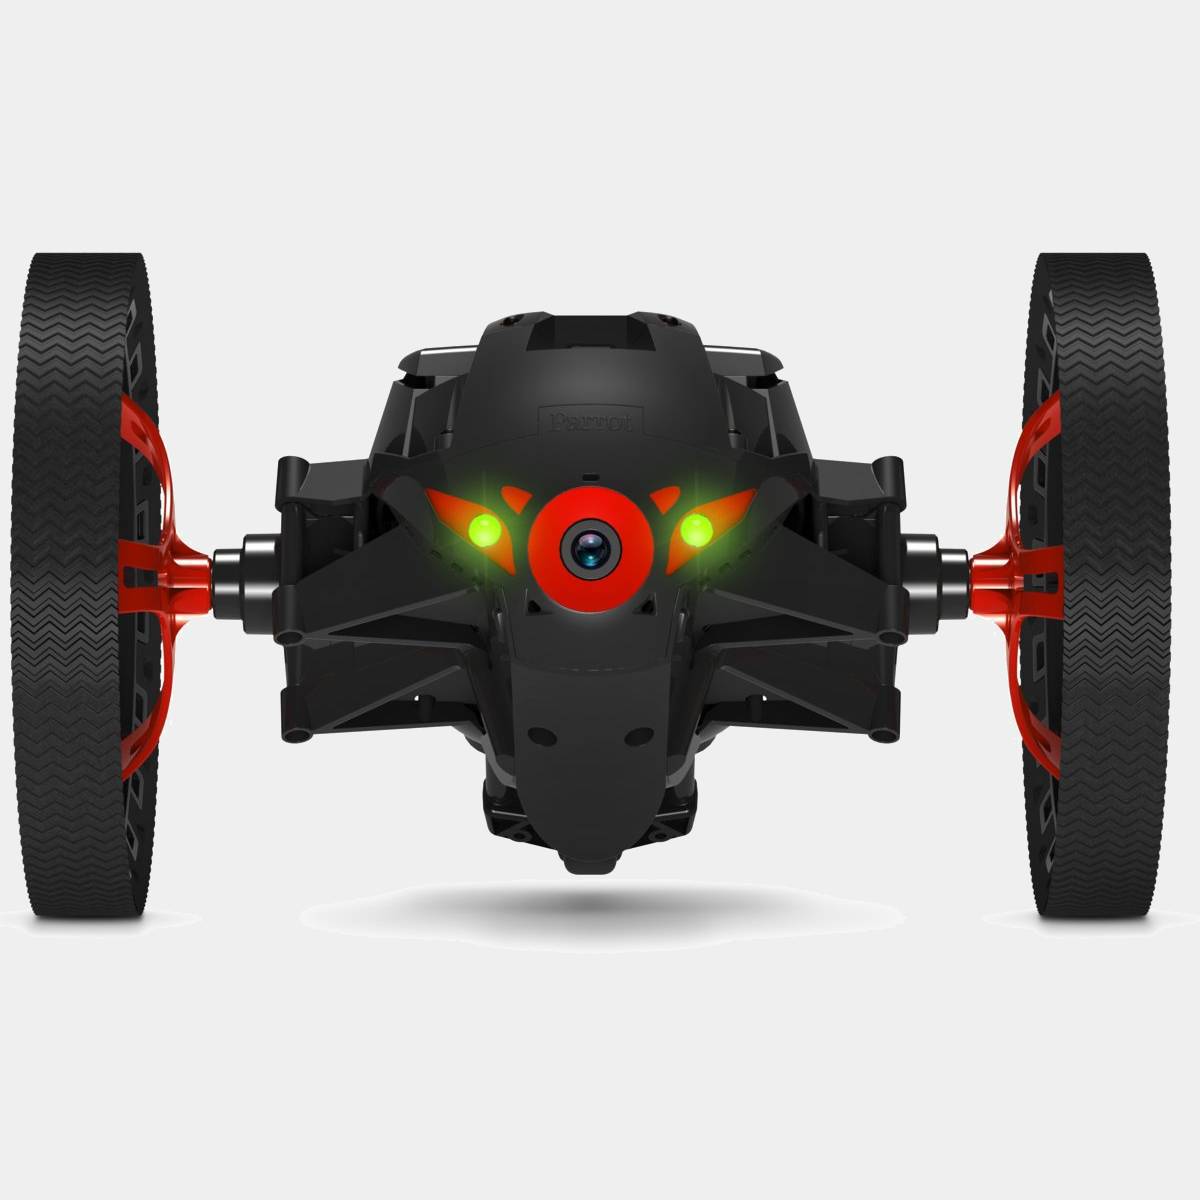 Drone Parrot Jumping Sumo negro Pf724001aa